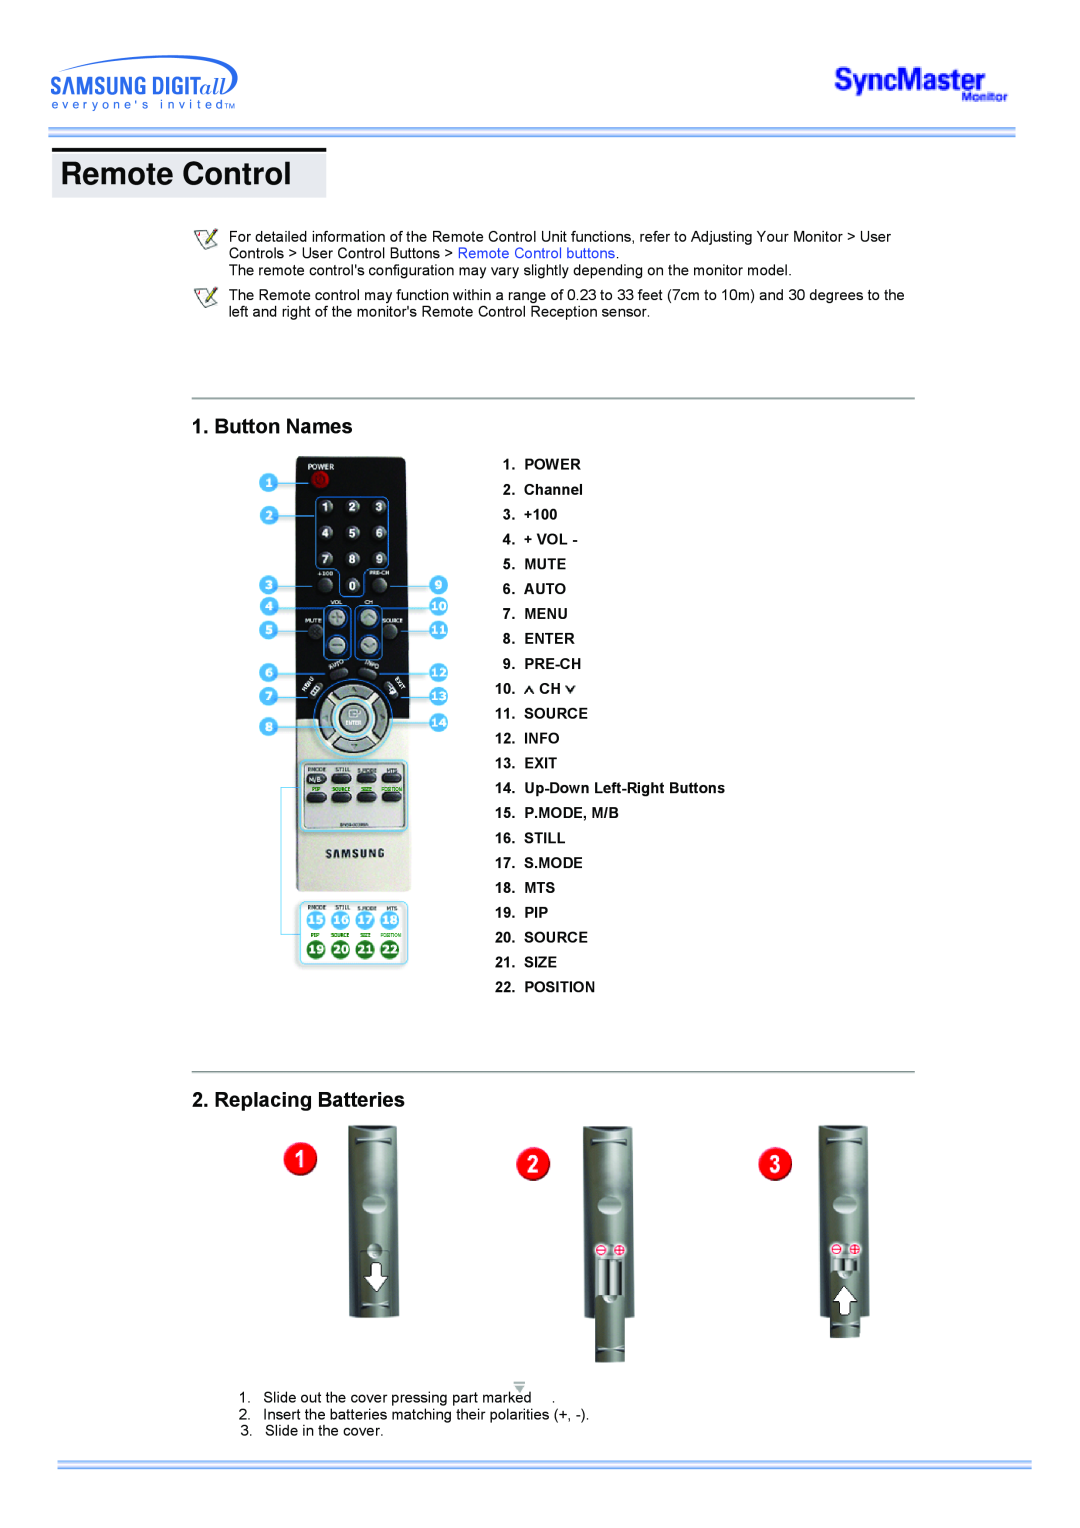 Samsung 173MP manual Remote Control, Button Names, Replacing Batteries 